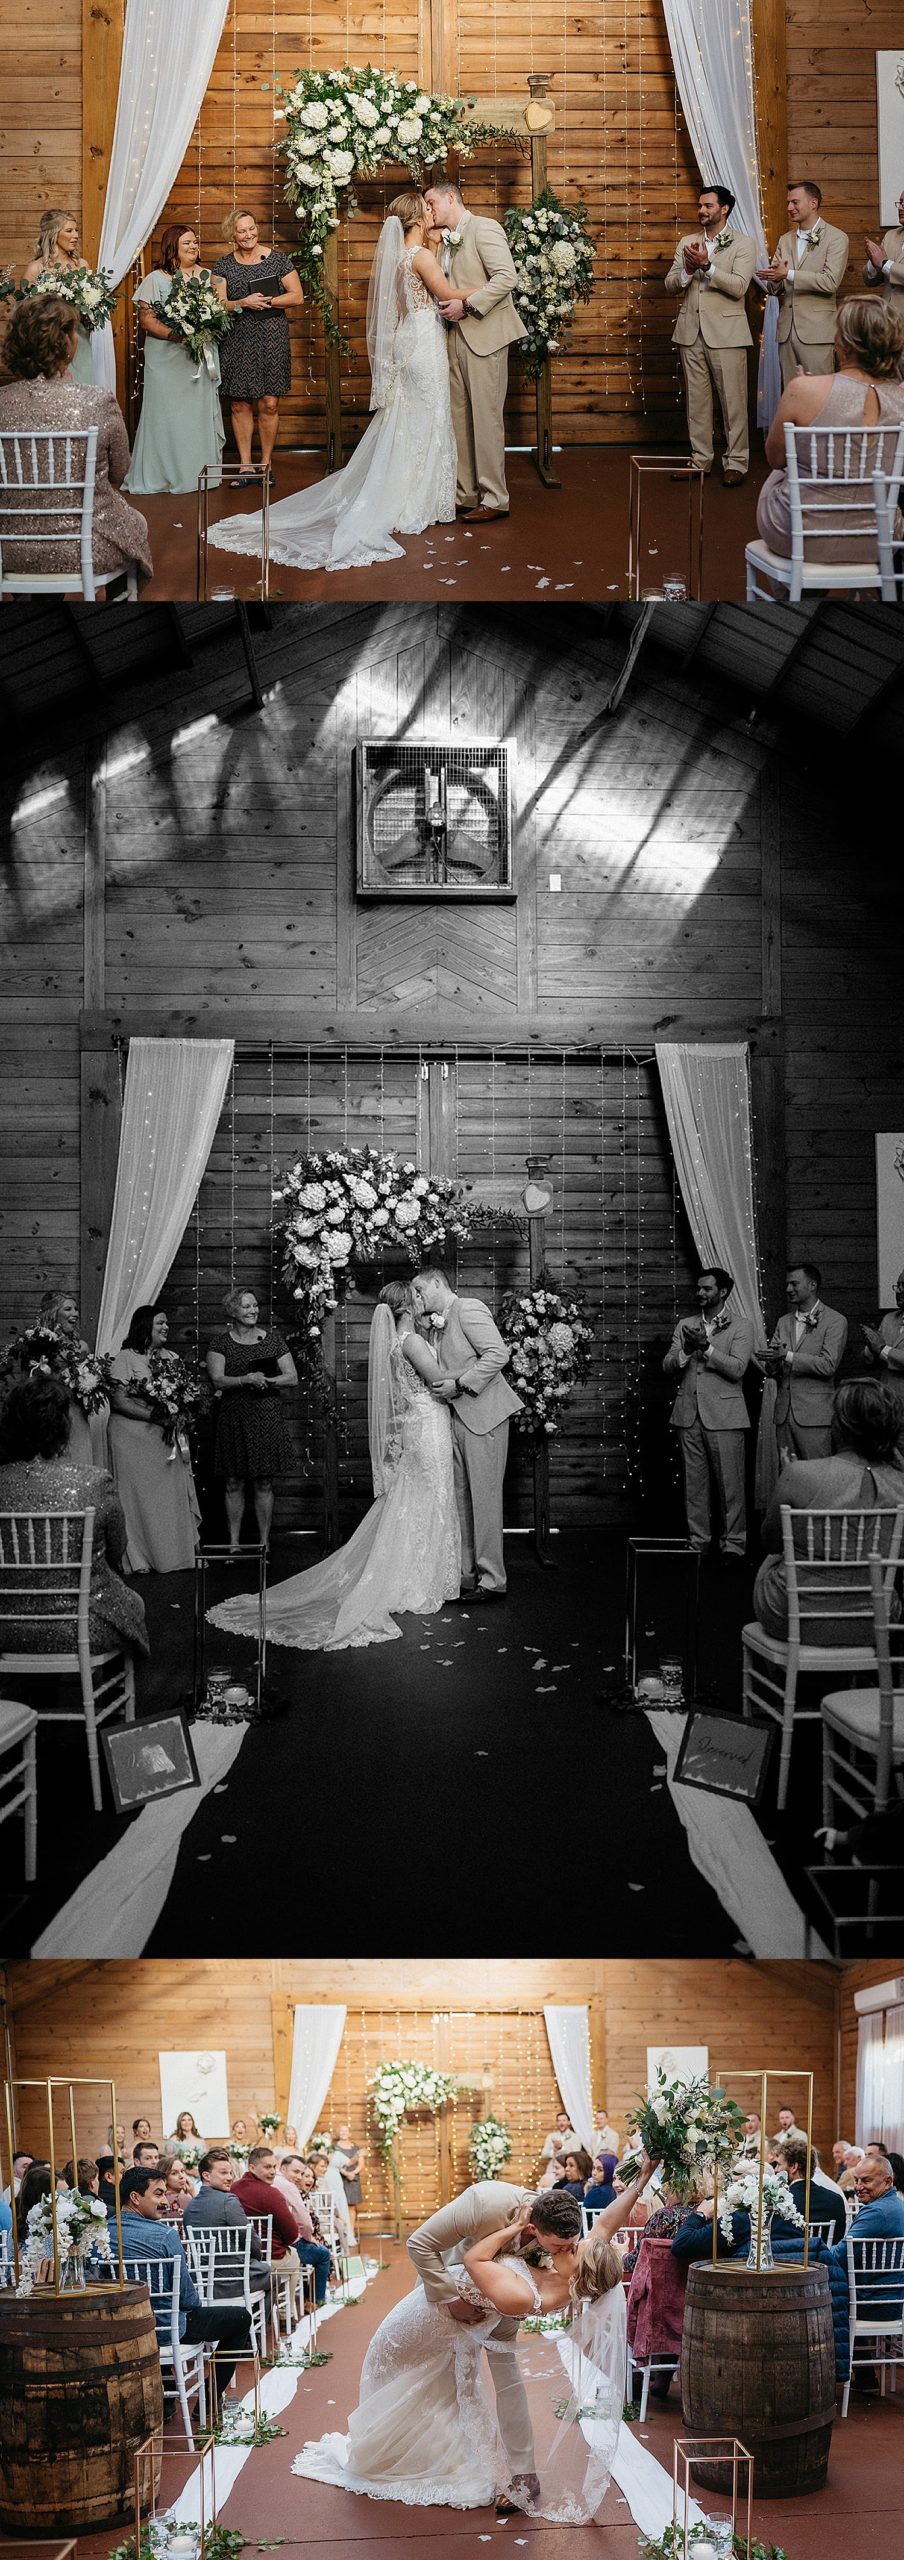 Bride and groom share first kiss during wedding Day ceremony at Lauren Hill Farm